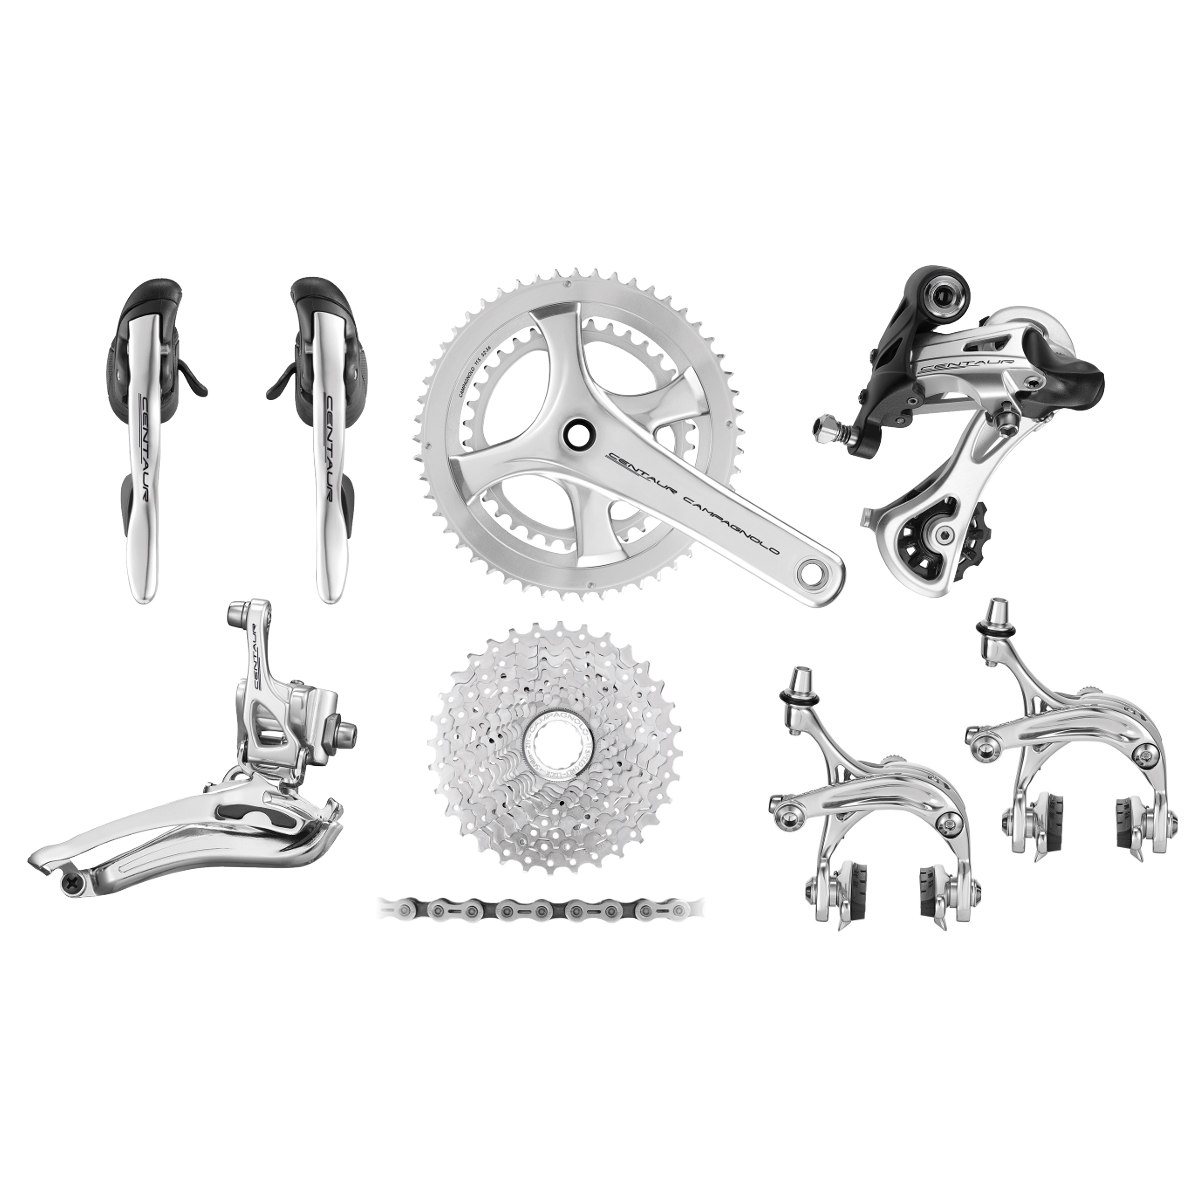 Picture of Campagnolo Centaur 11 Groupset 2x11 - silver